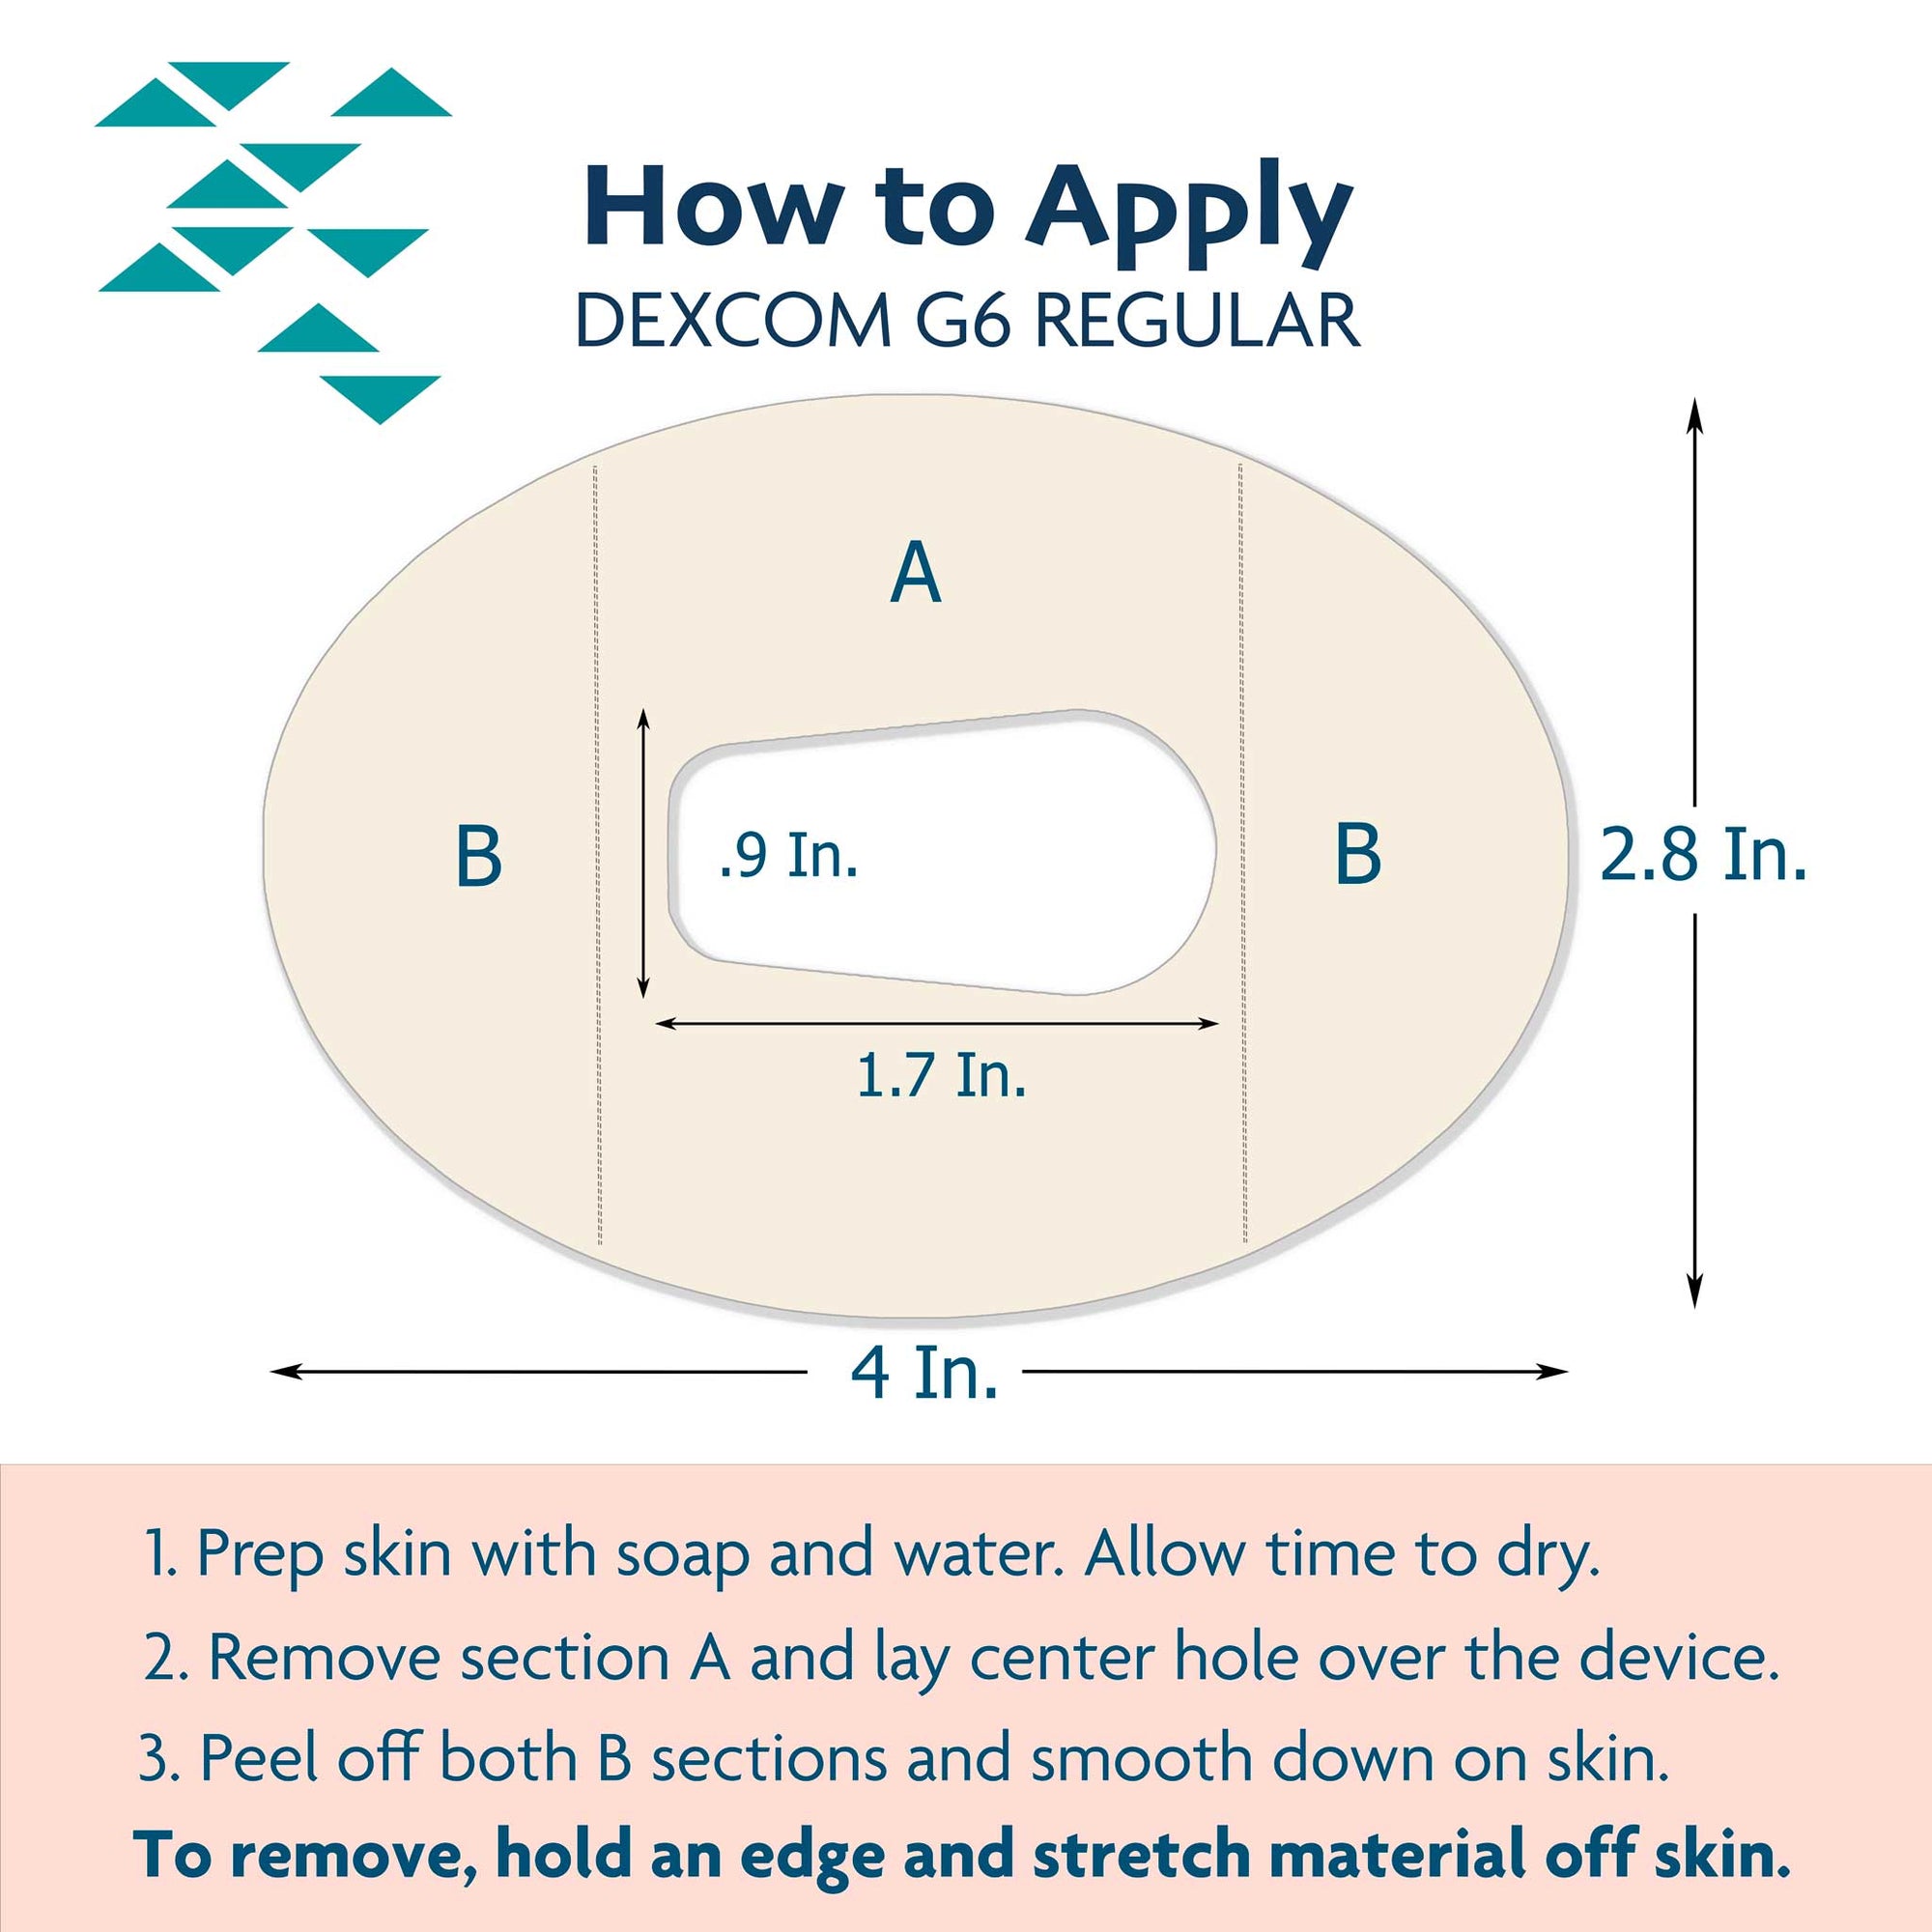 ExpressionMed Dexcom G6 Adhesive Tape Application Instructions and Dimensions